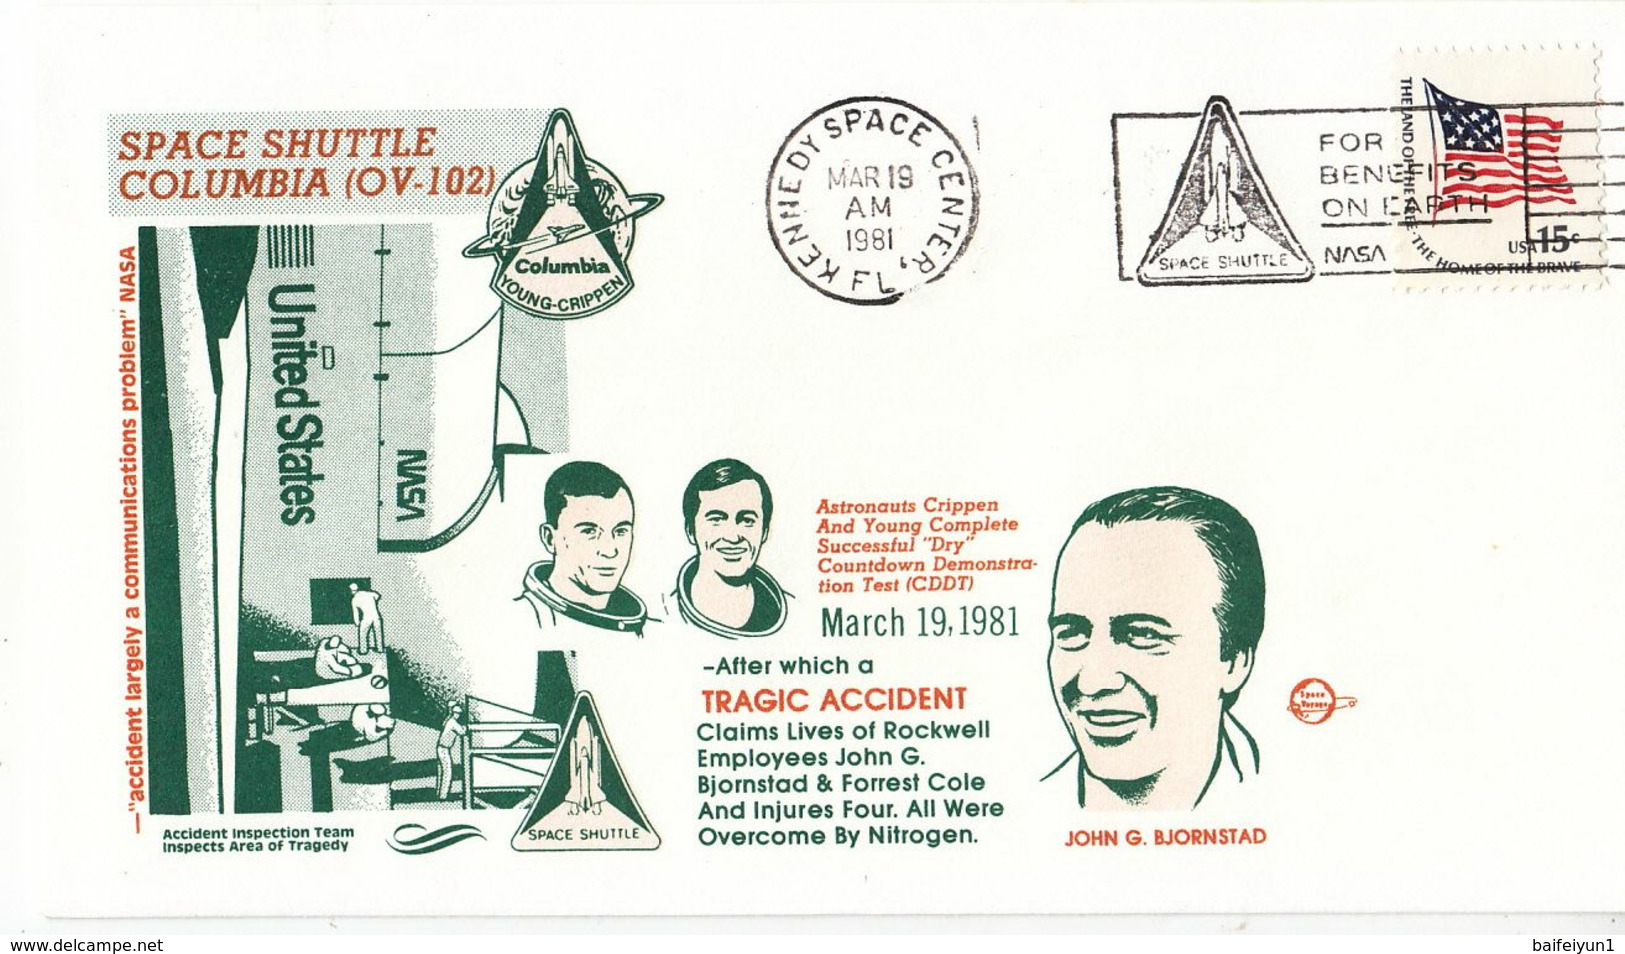 USA 1981 Space Shuttle Astronaunts Successful "Dry" Counterdown Demonstration Test Commemorative Cover - Nordamerika